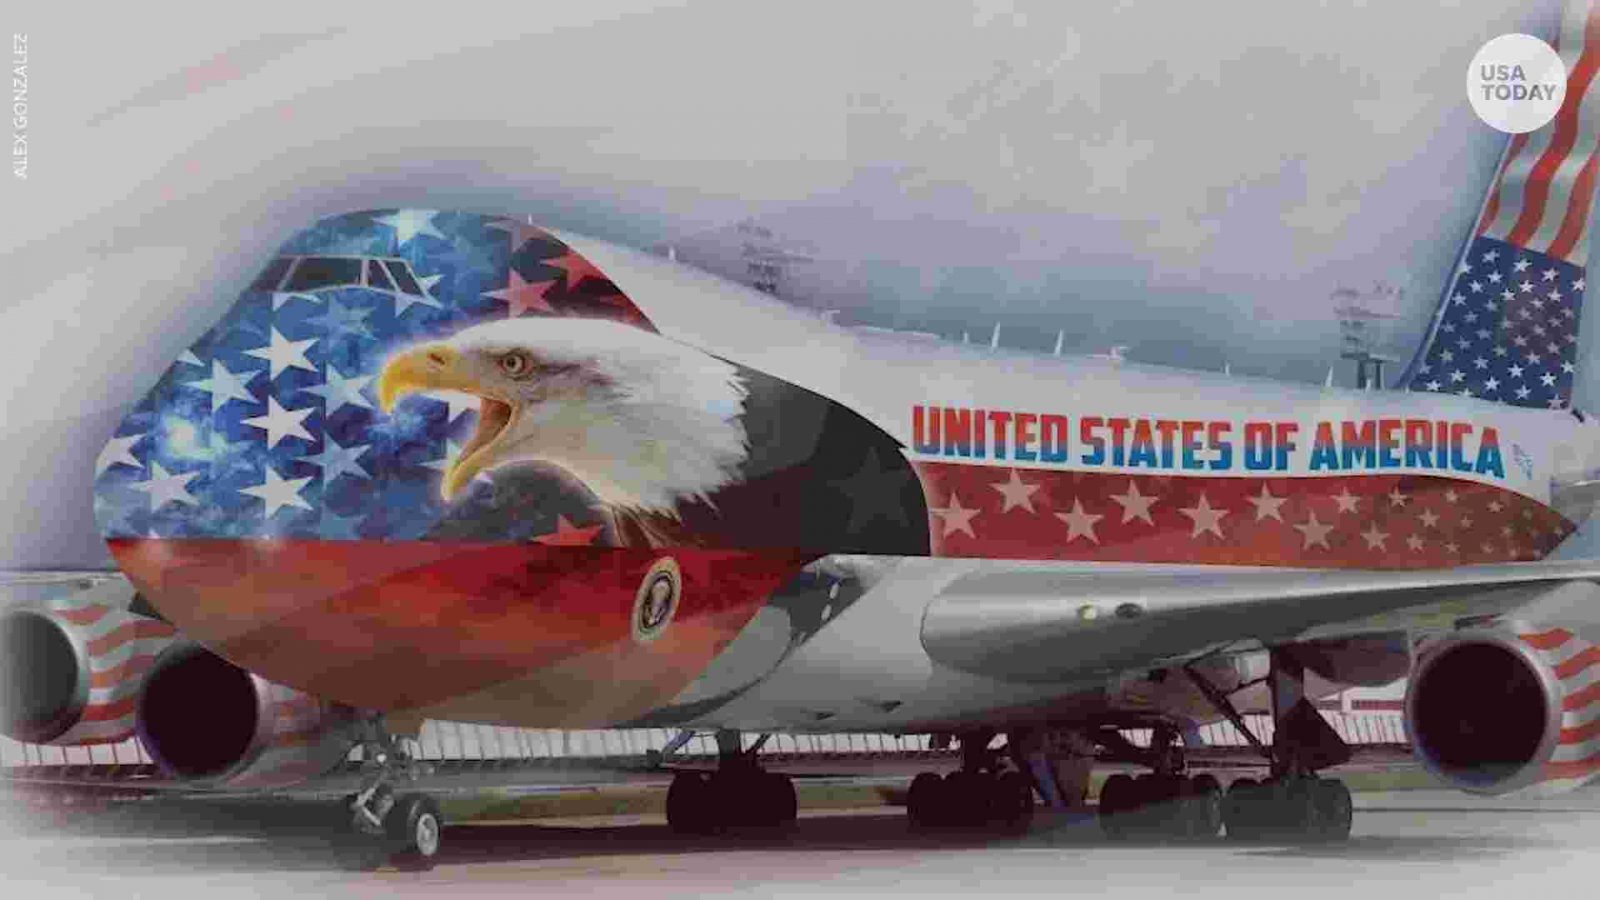 Trump Wants the New Air Force One to be Painted Red, White & Blue a